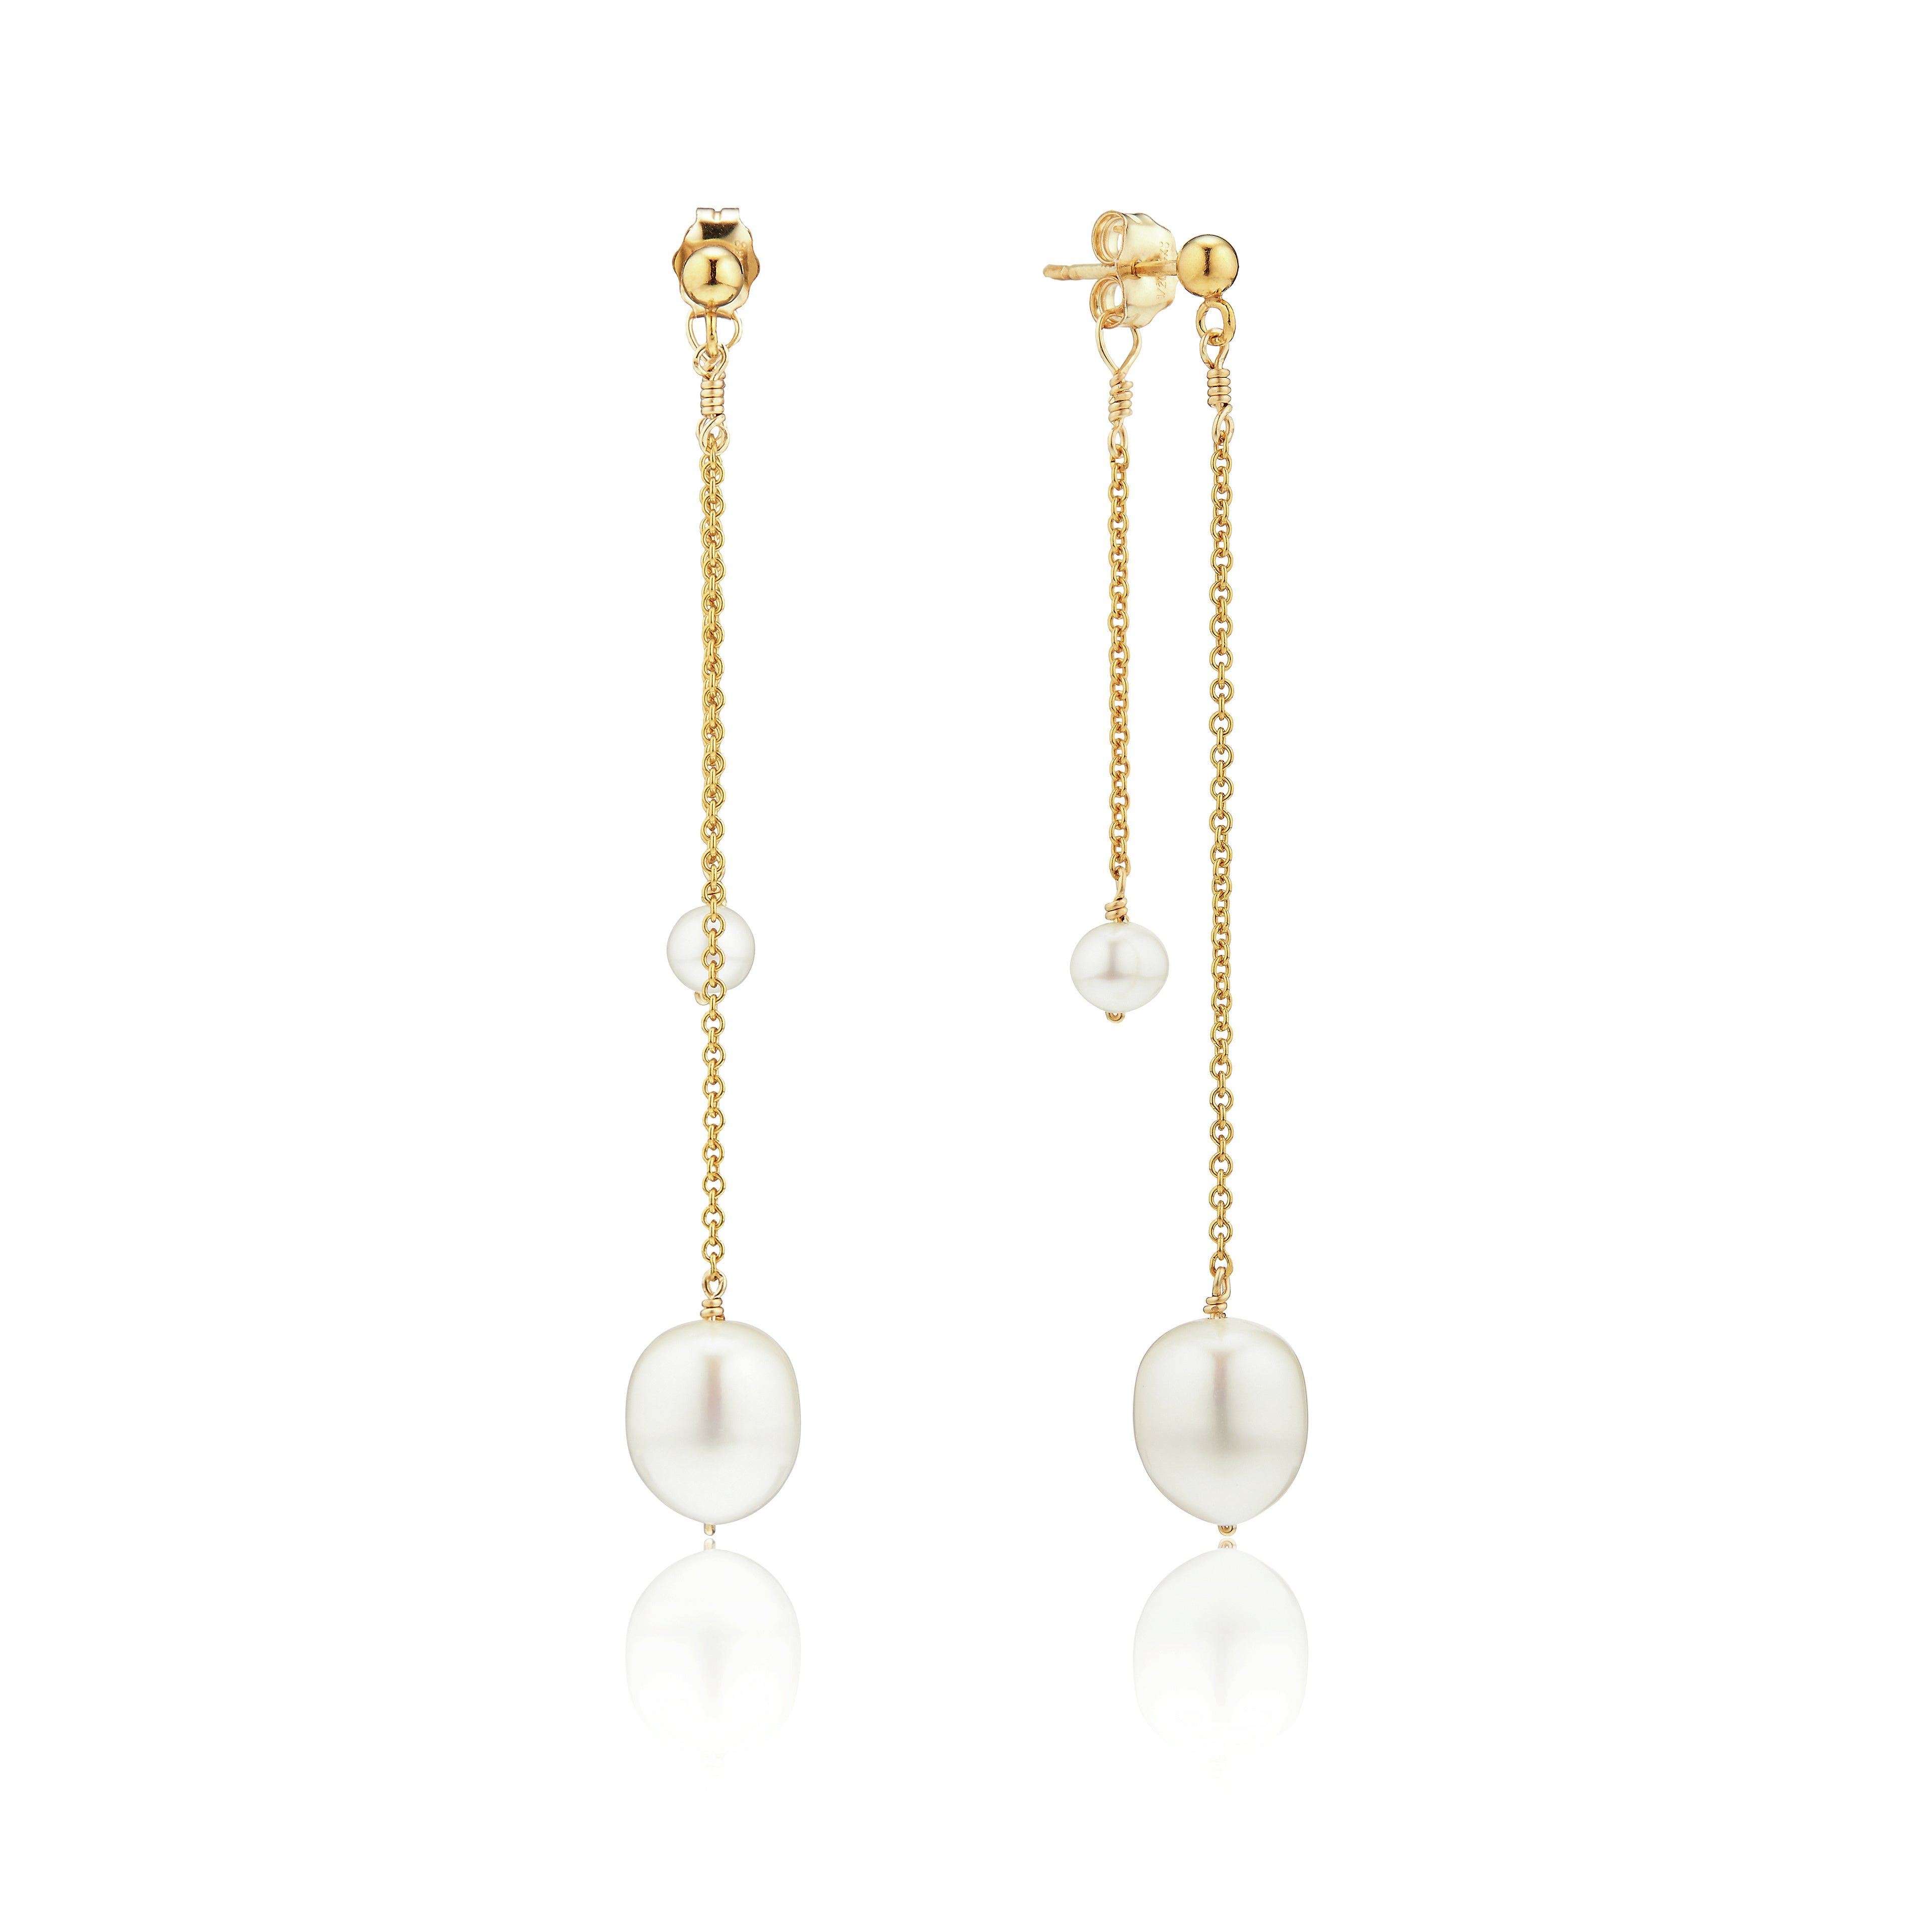 Gold layered large and small pearl earrings on a white background